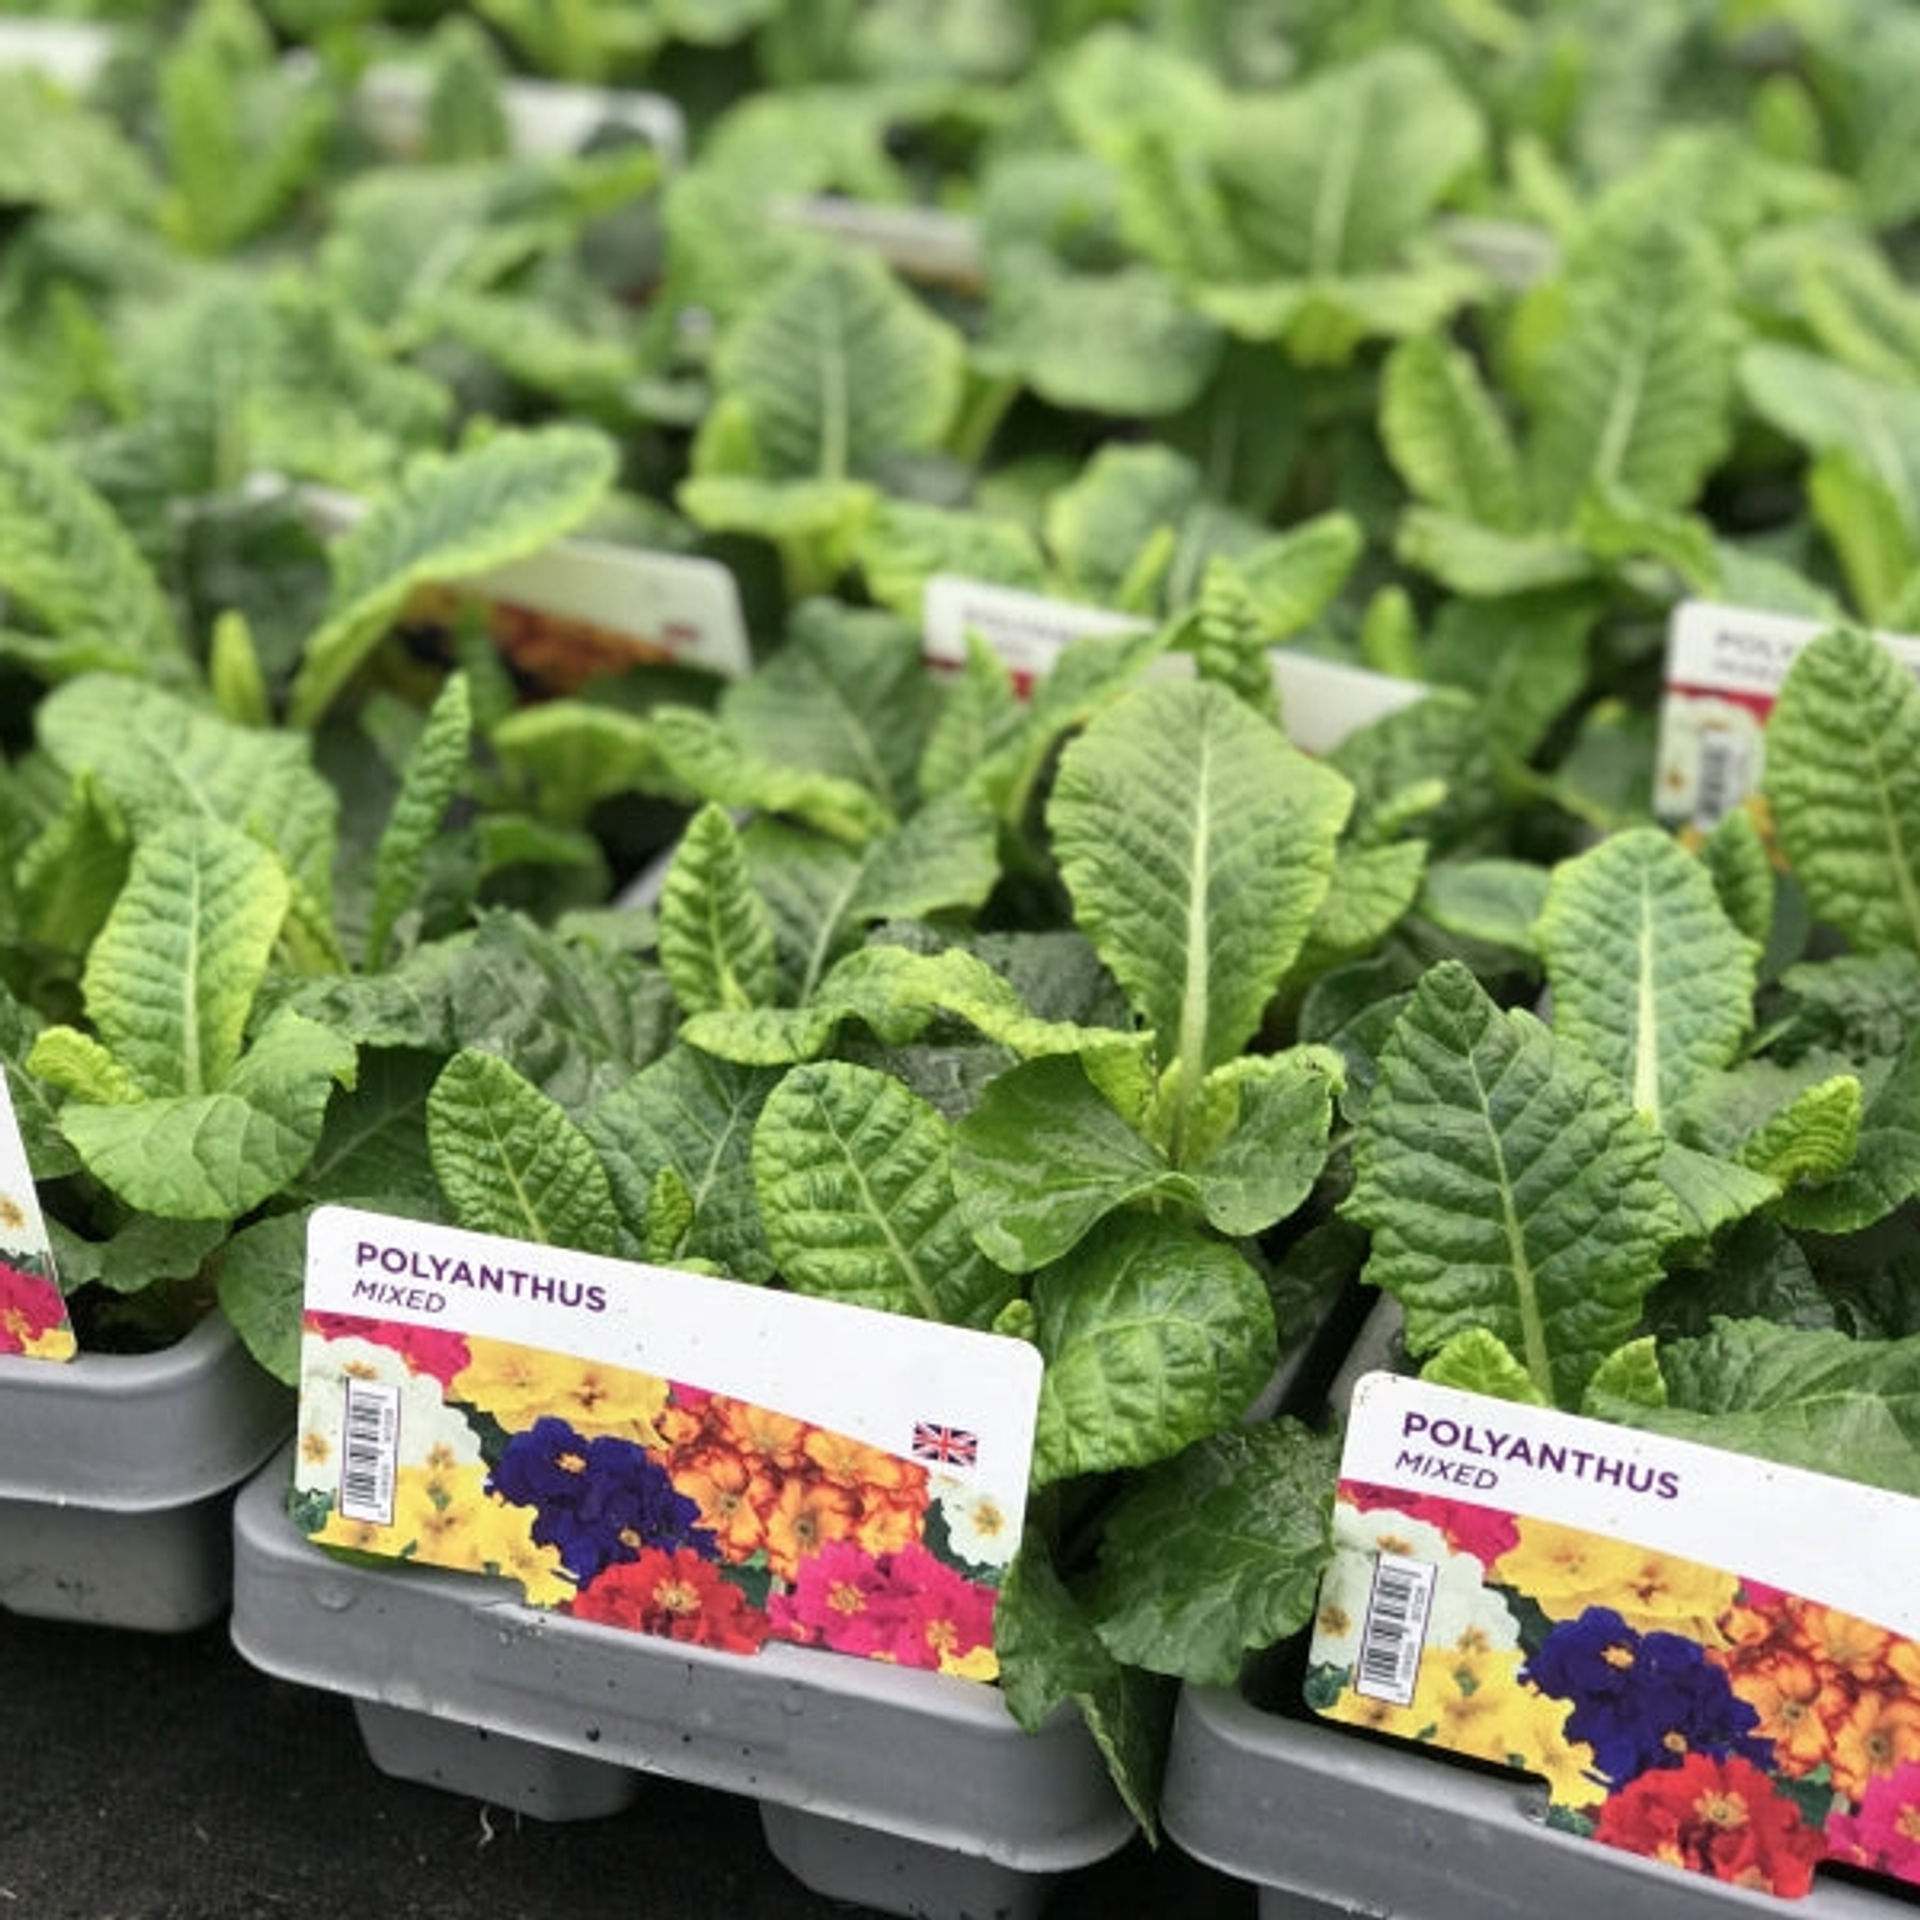 Polyanthus 'Mixed' 6 Pack x 2 - 12 Plants